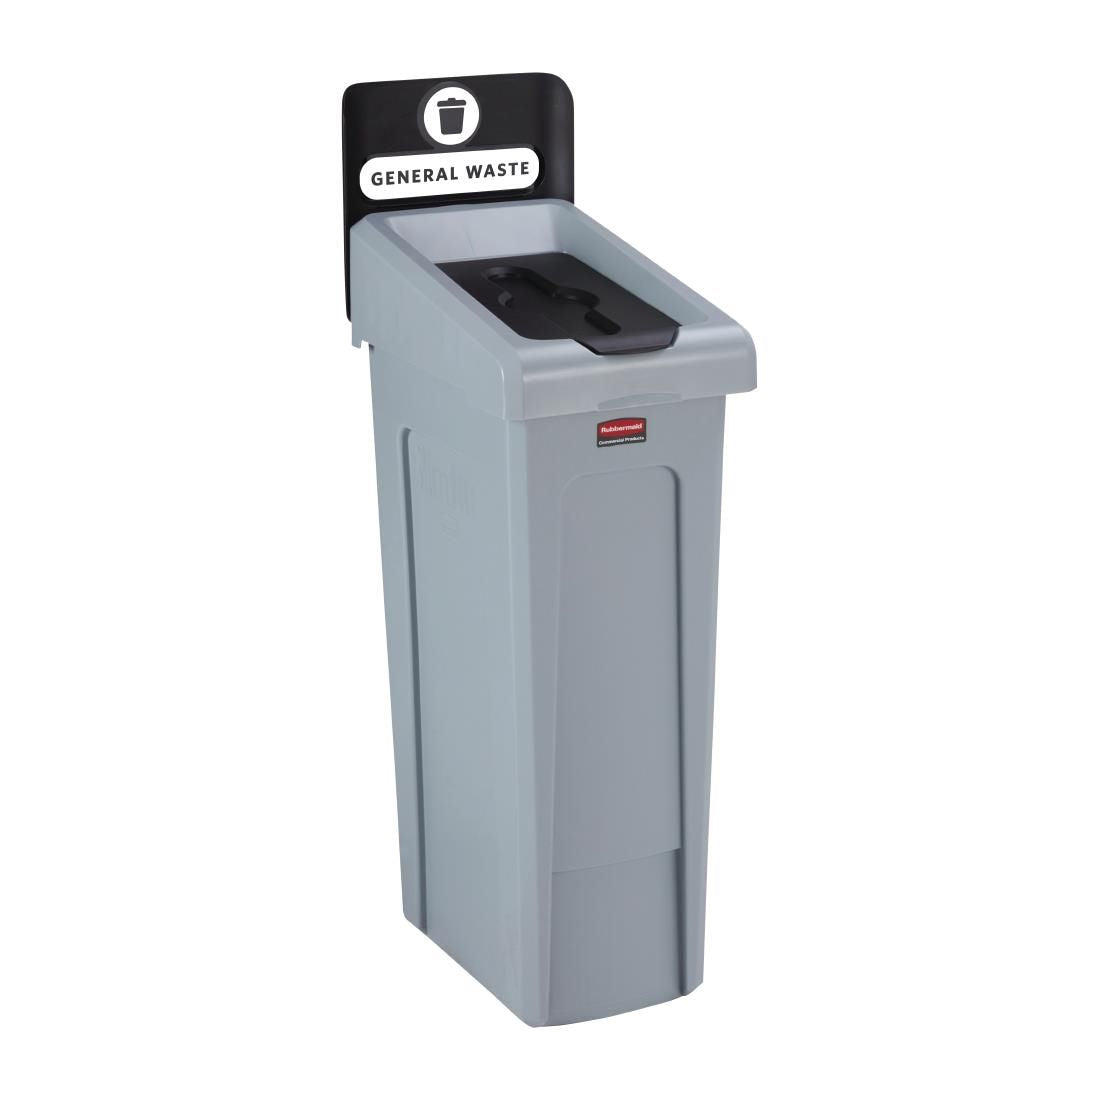 DY082 Rubbermaid Slim Jim General Waste Recycling Station Black 87Ltr